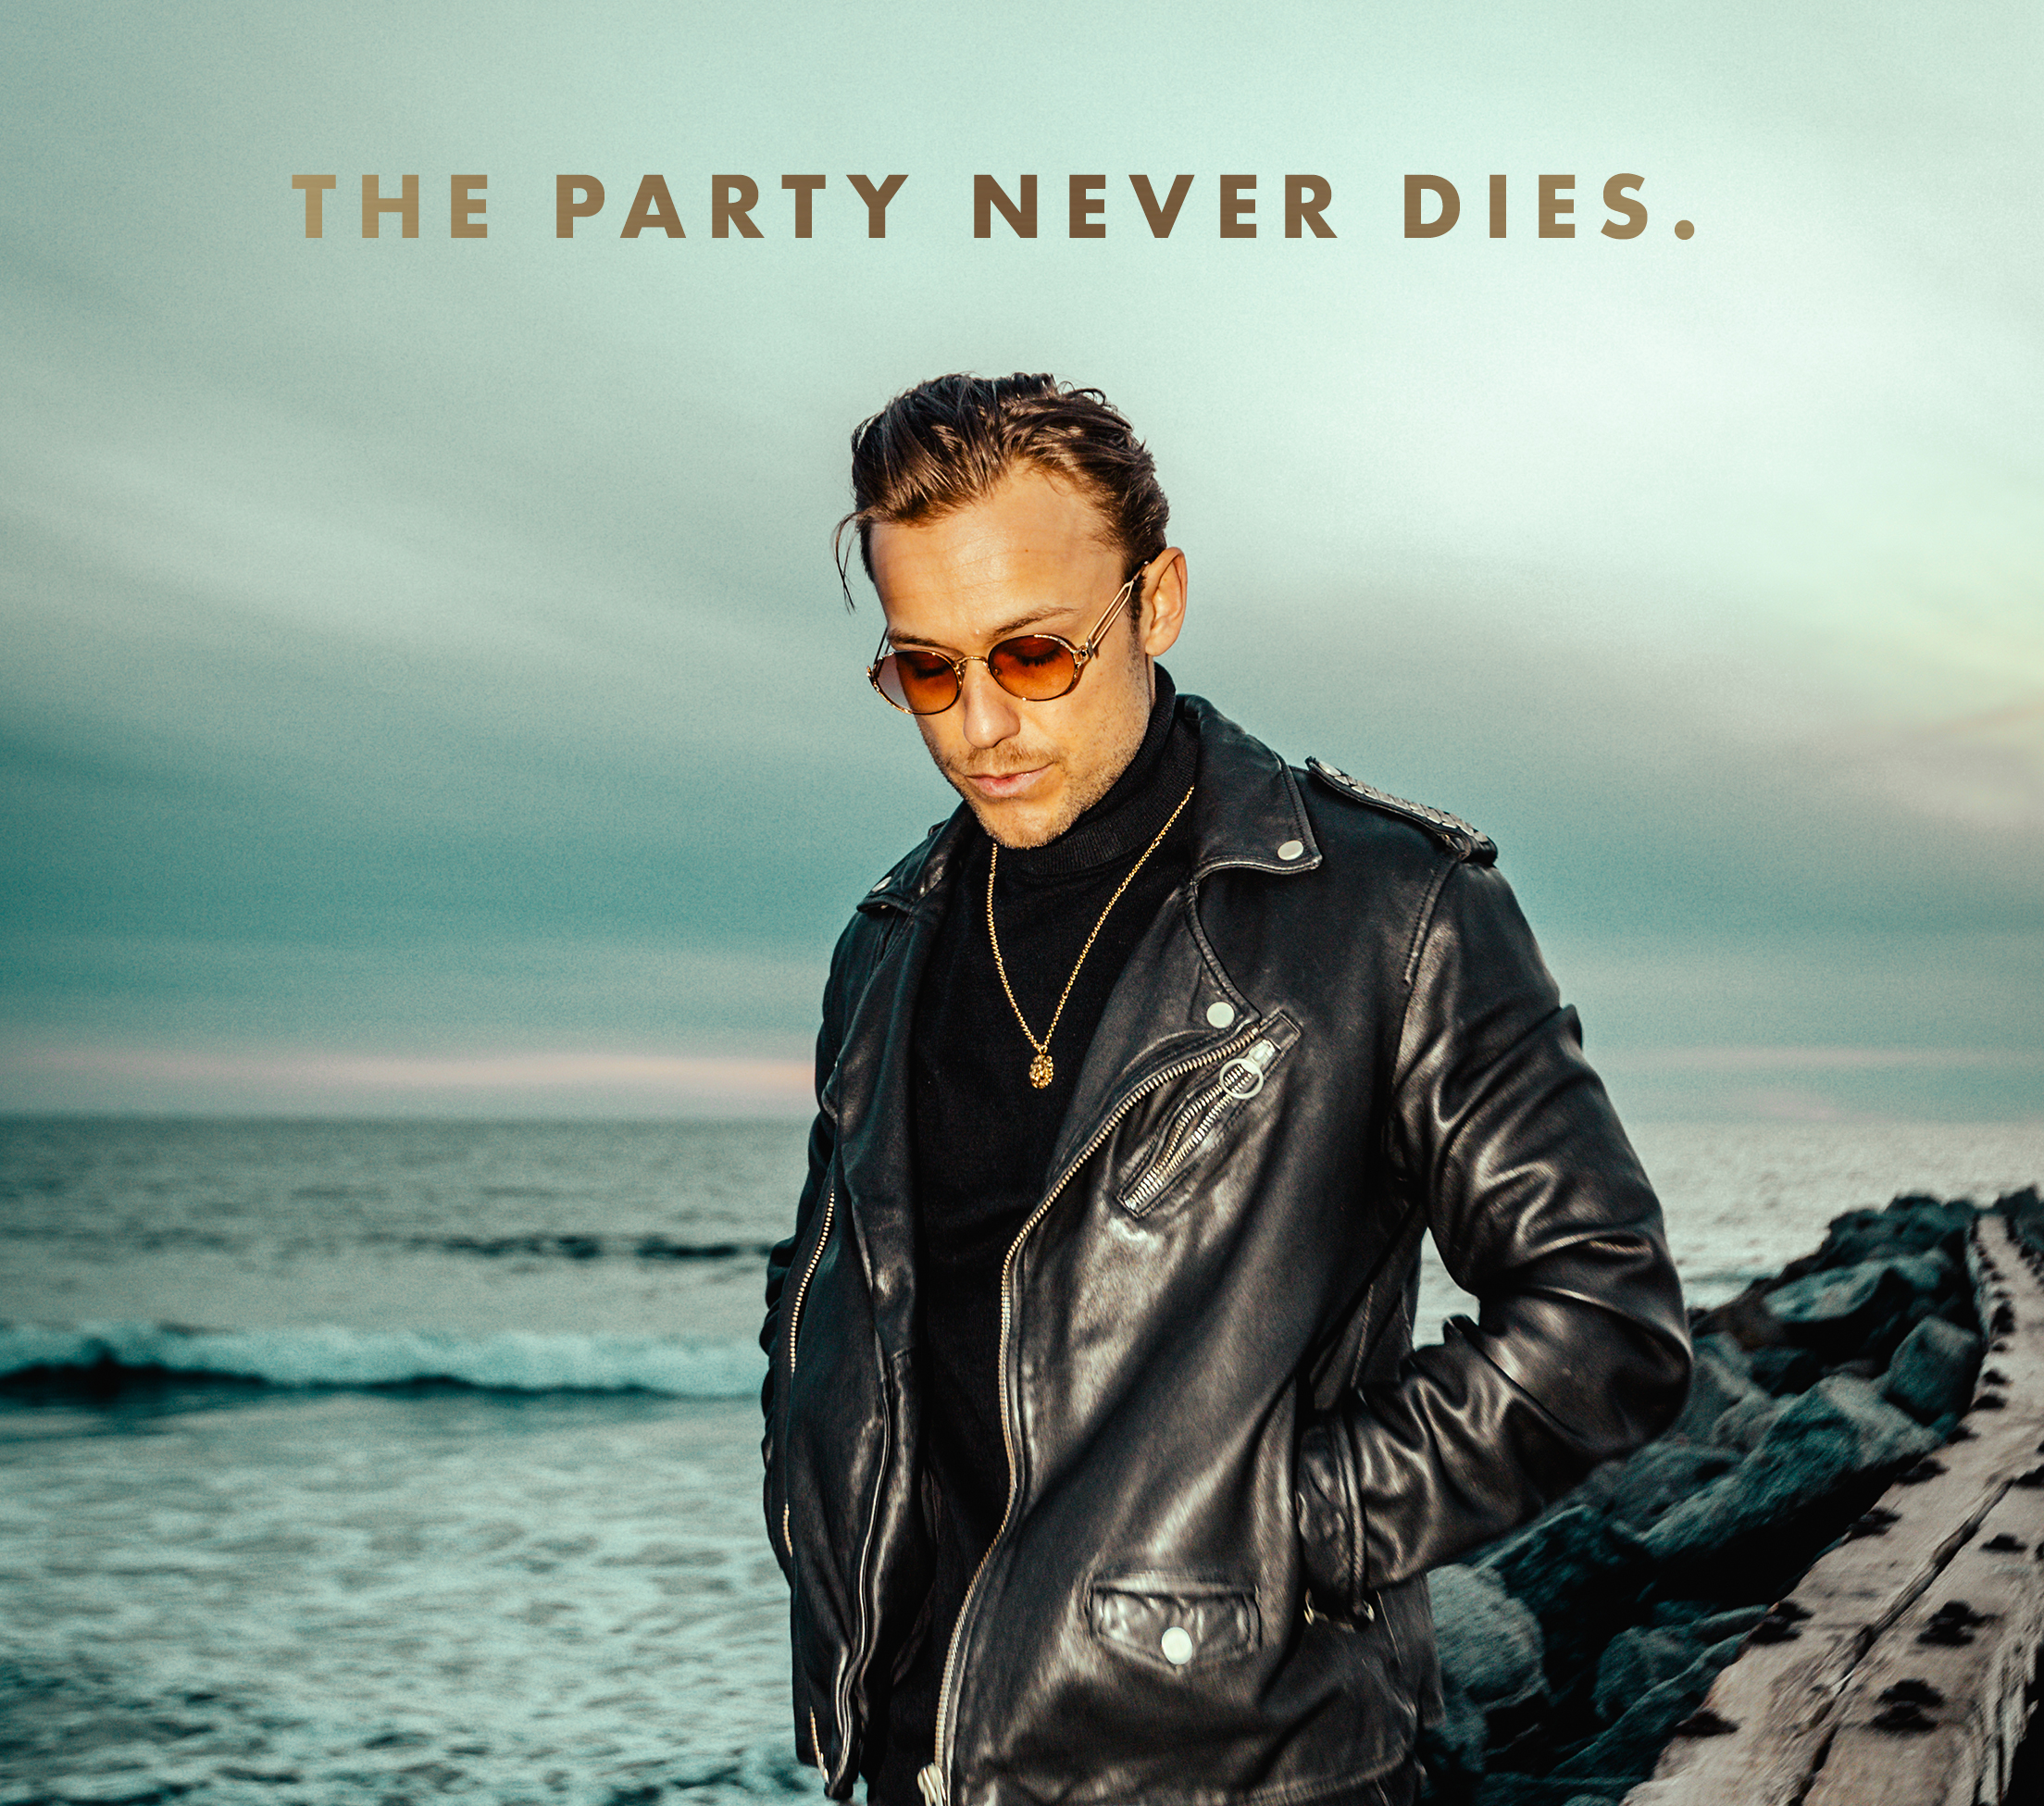 The party never dies.